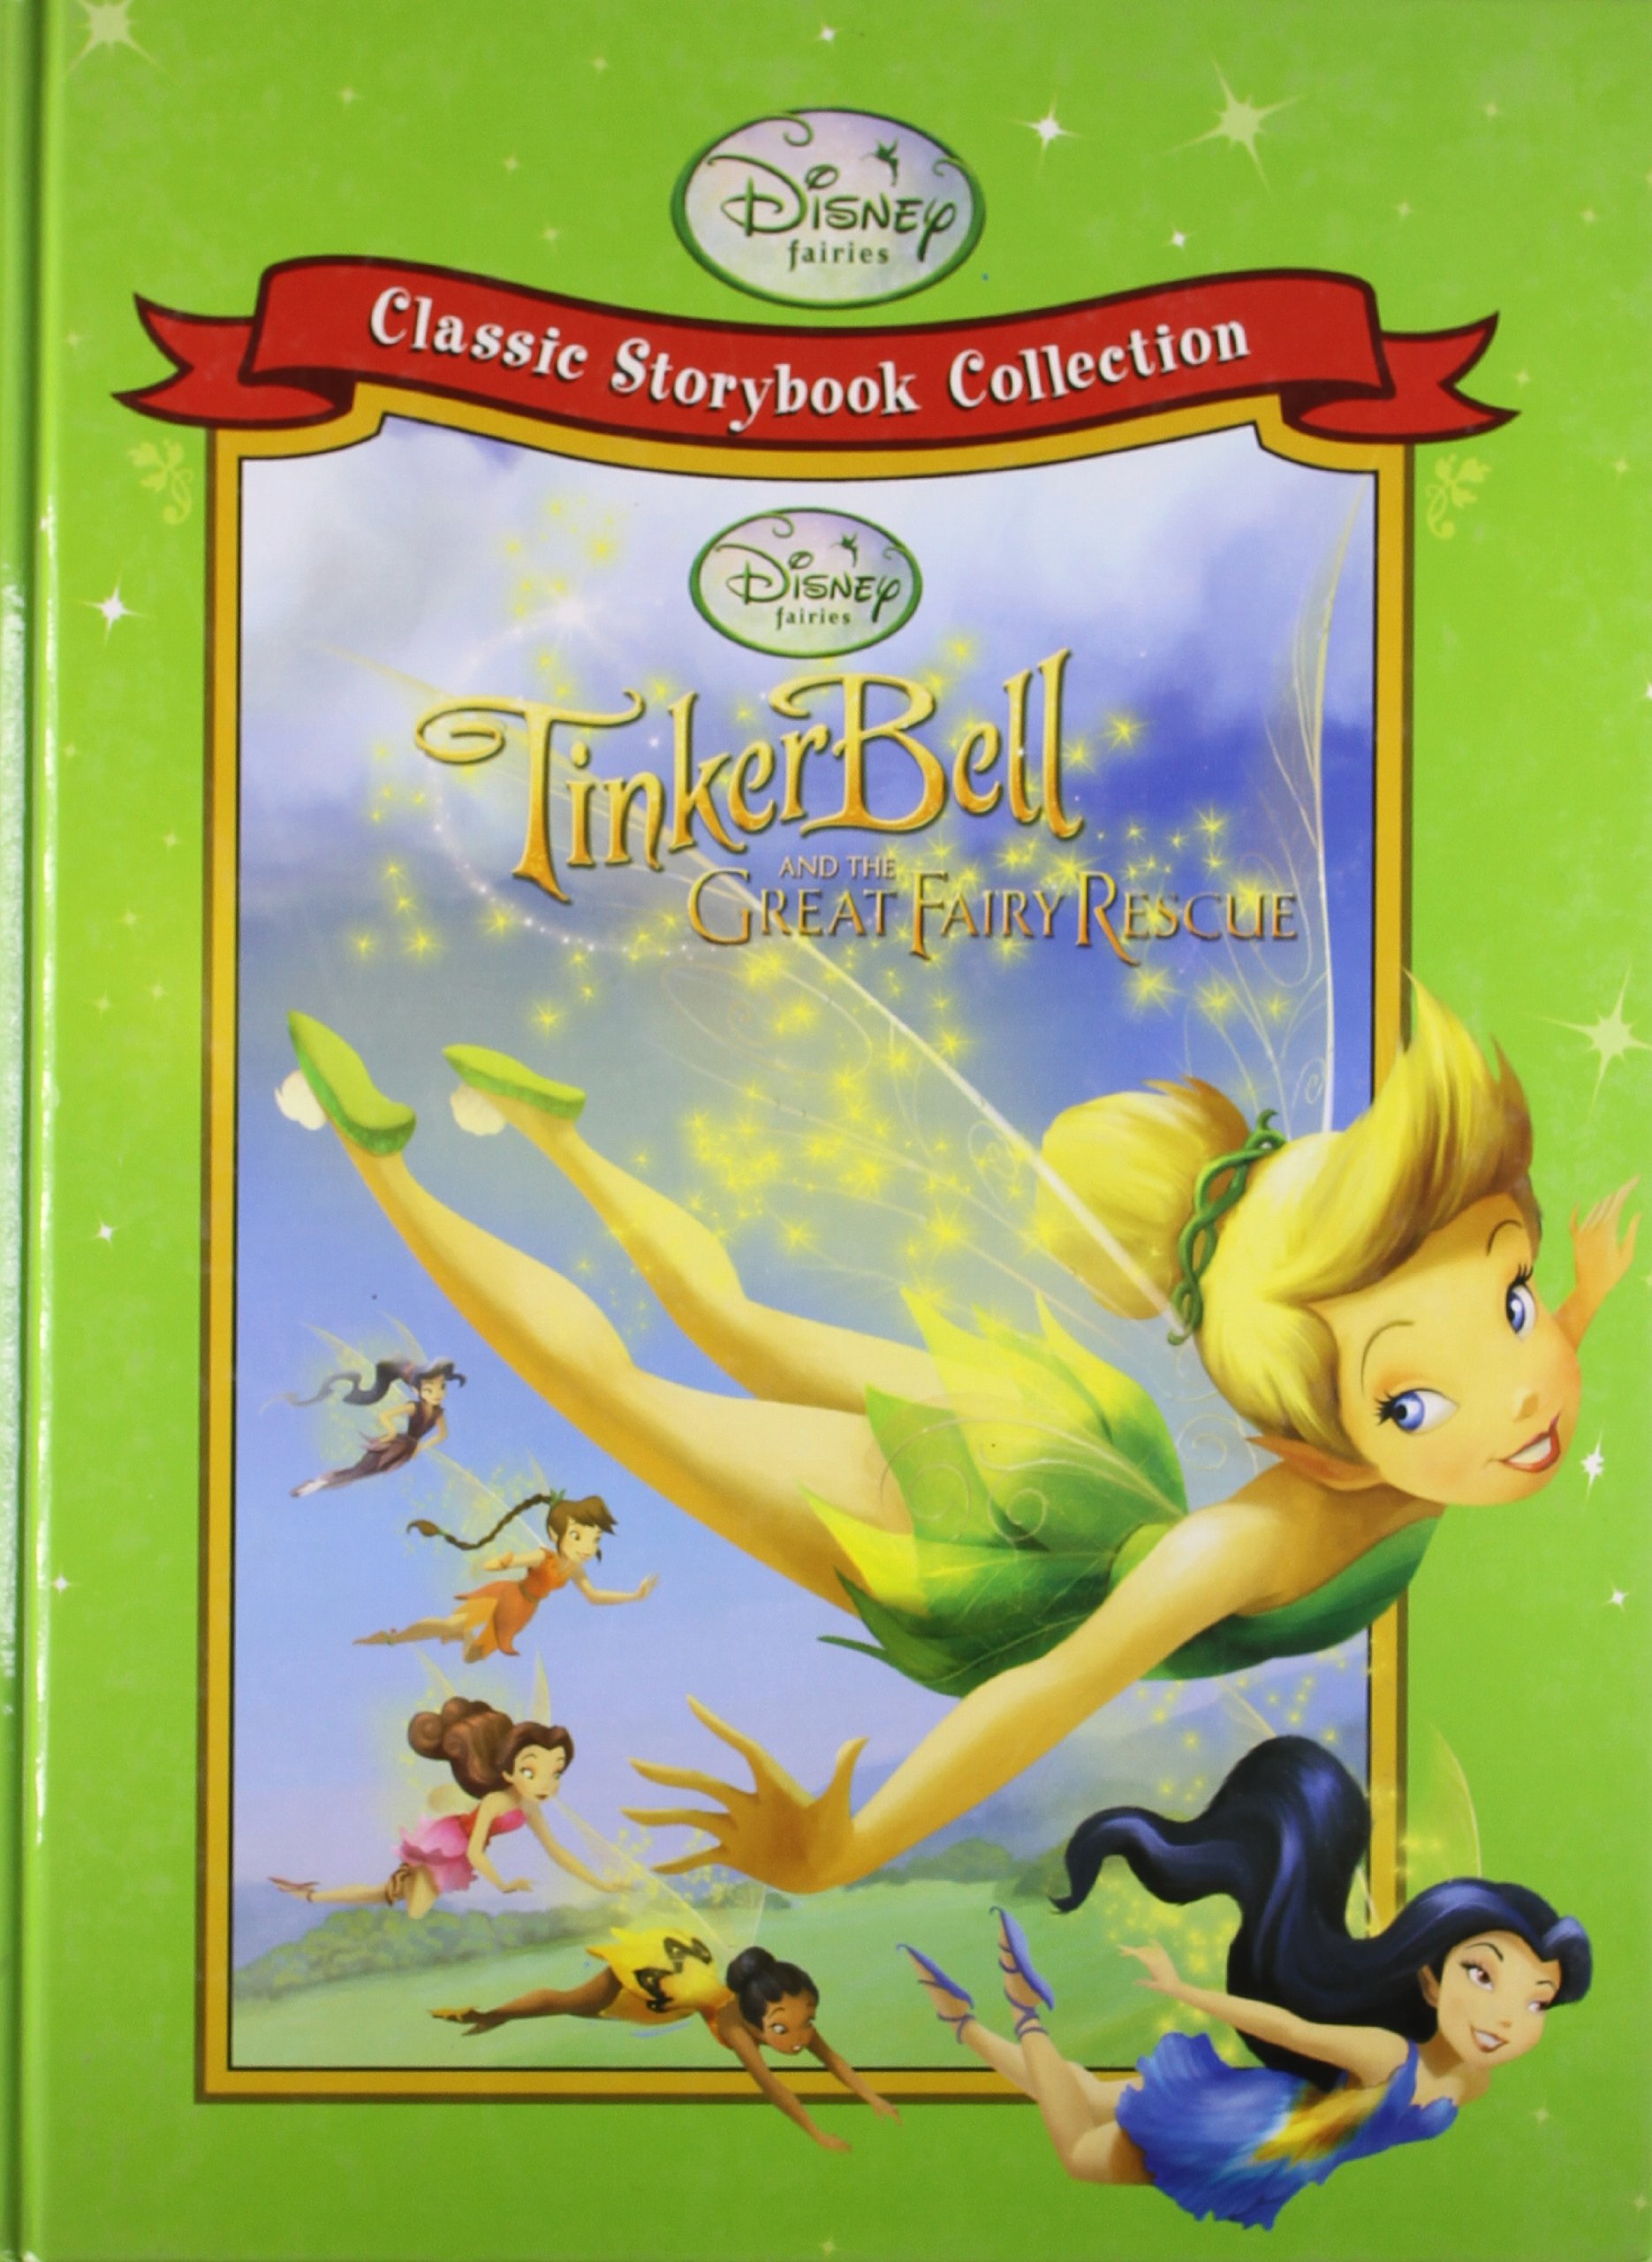 Tinker Bell and the Great Fairy Rescue, Full Movie